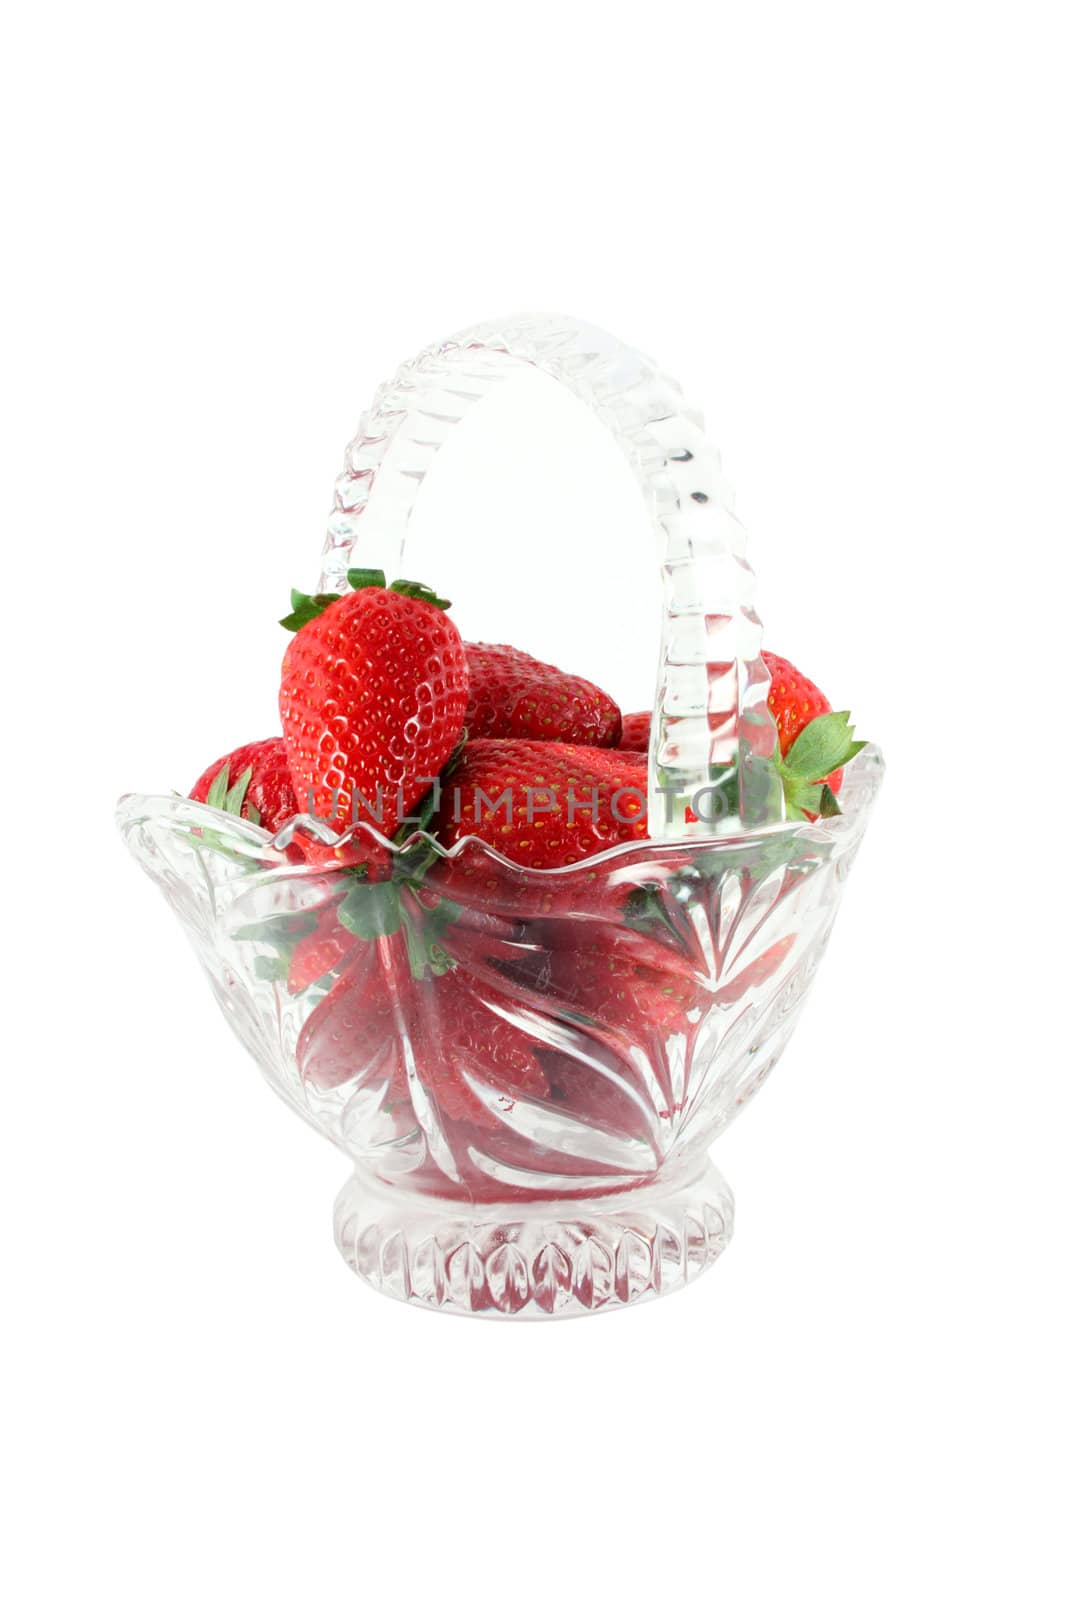 Strawberries in a glass basket isolated on white